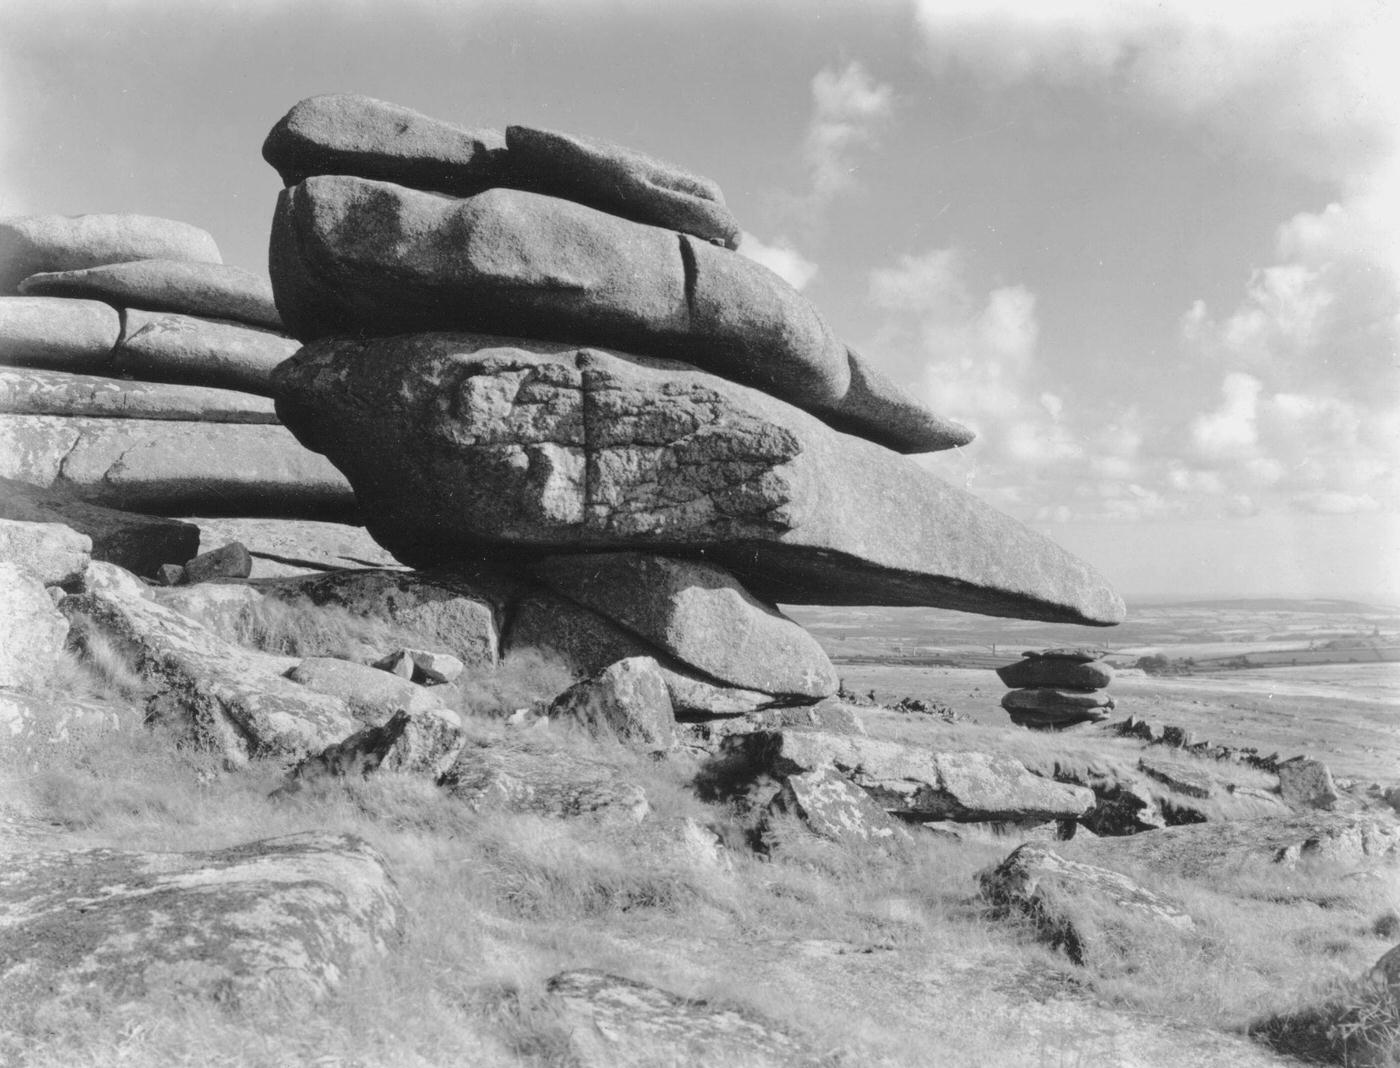 Cheesewrings, heights of Bodmin Moor, near Mintons, Cornwall, 1970.